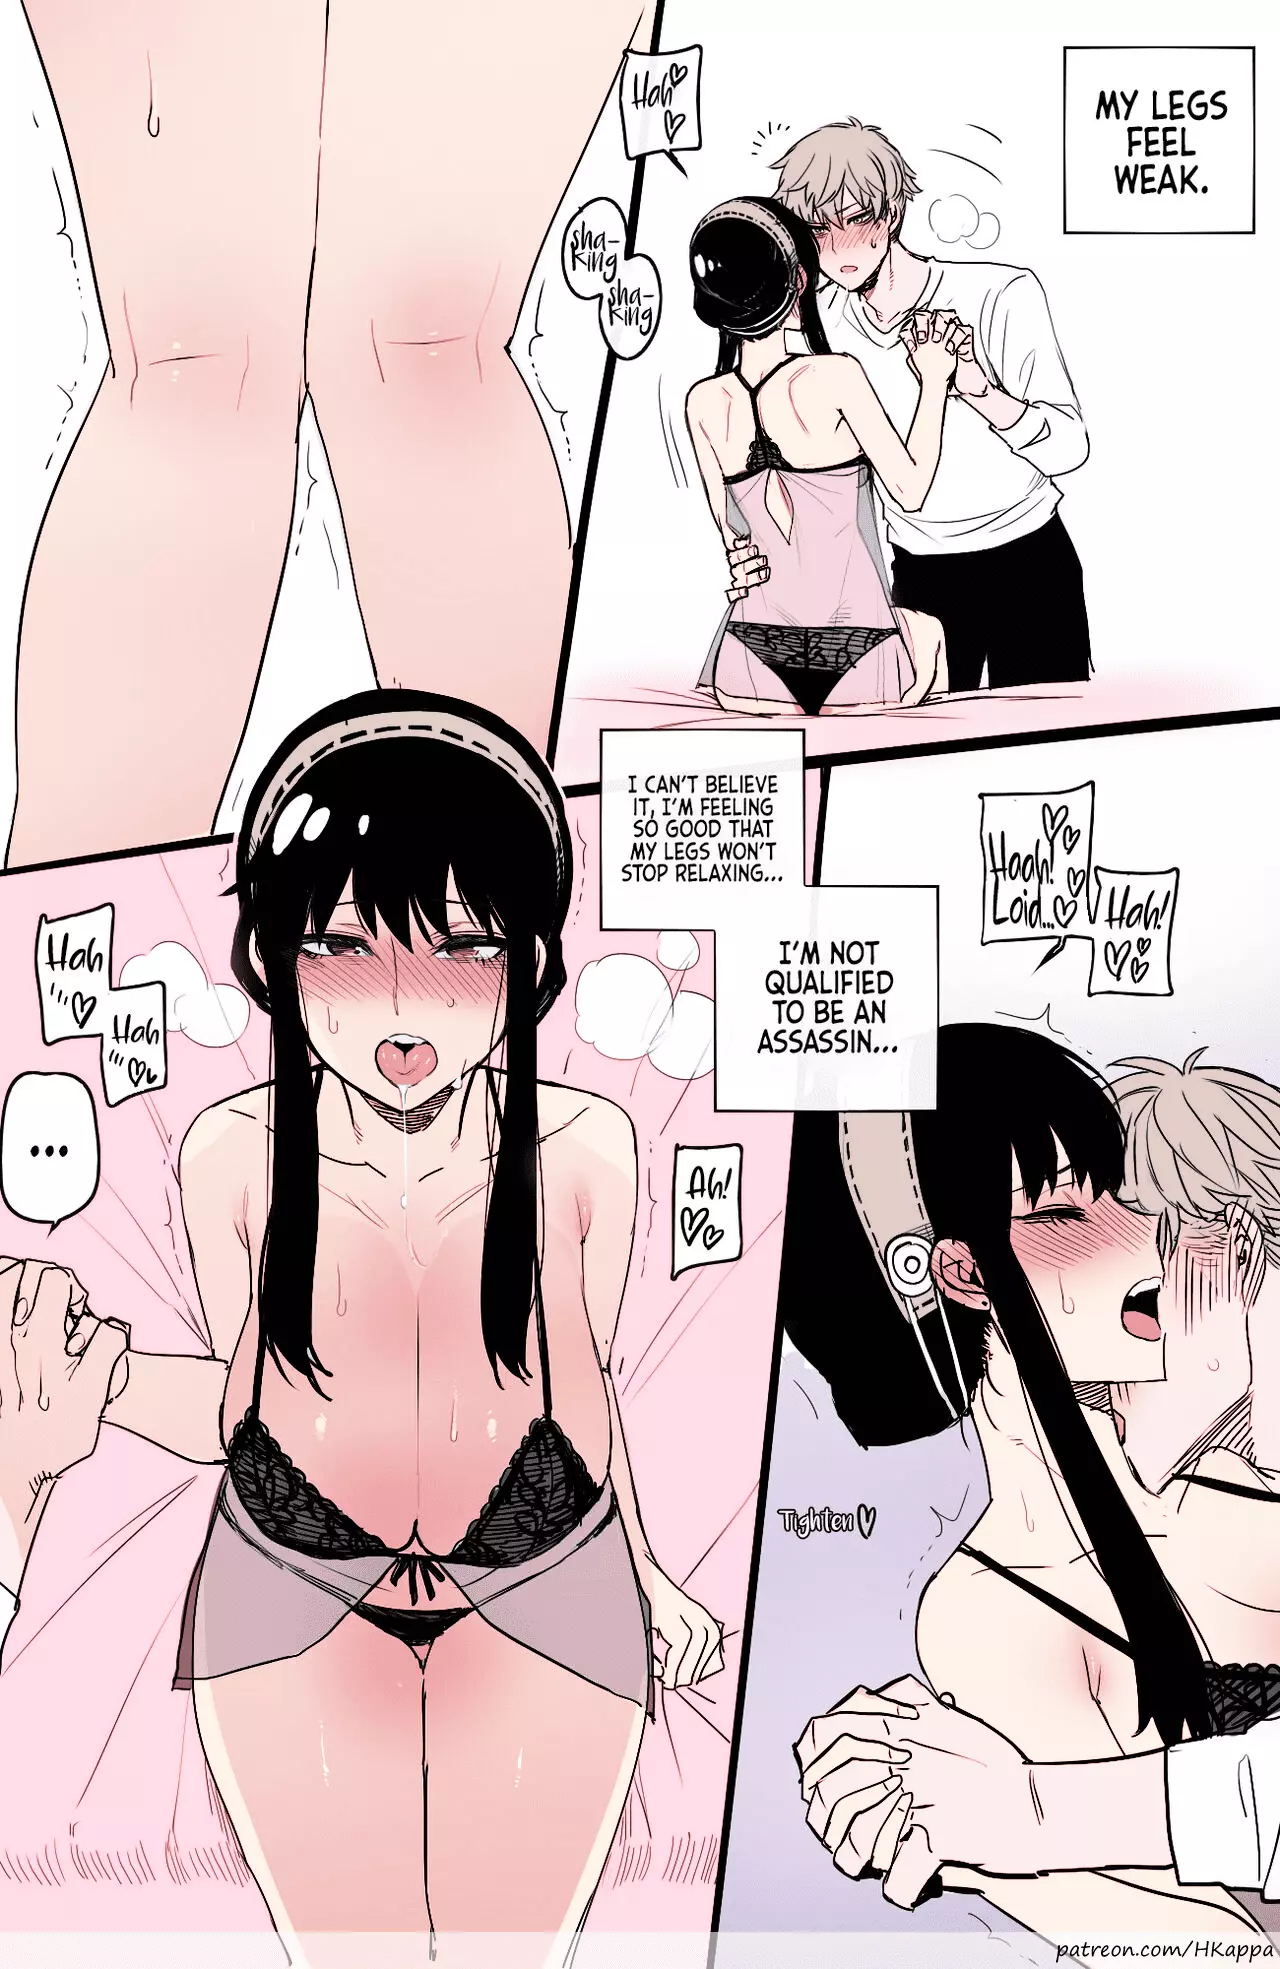 Spy x family hentai comic - Yor and loid having sex for the first time